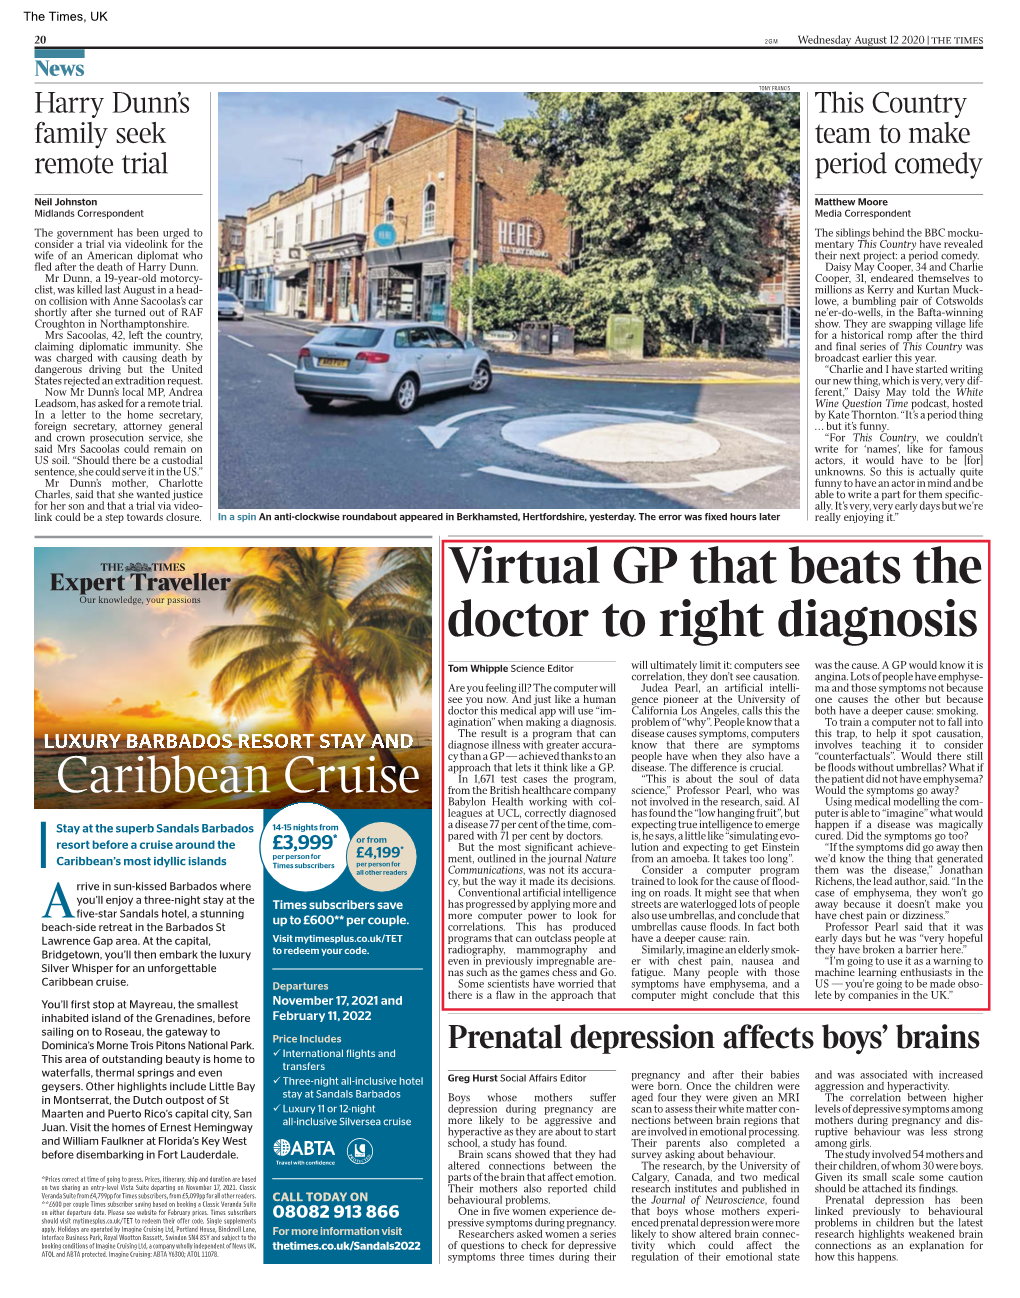 Virtual GP That Beats the Doctor to Right Diagnosis